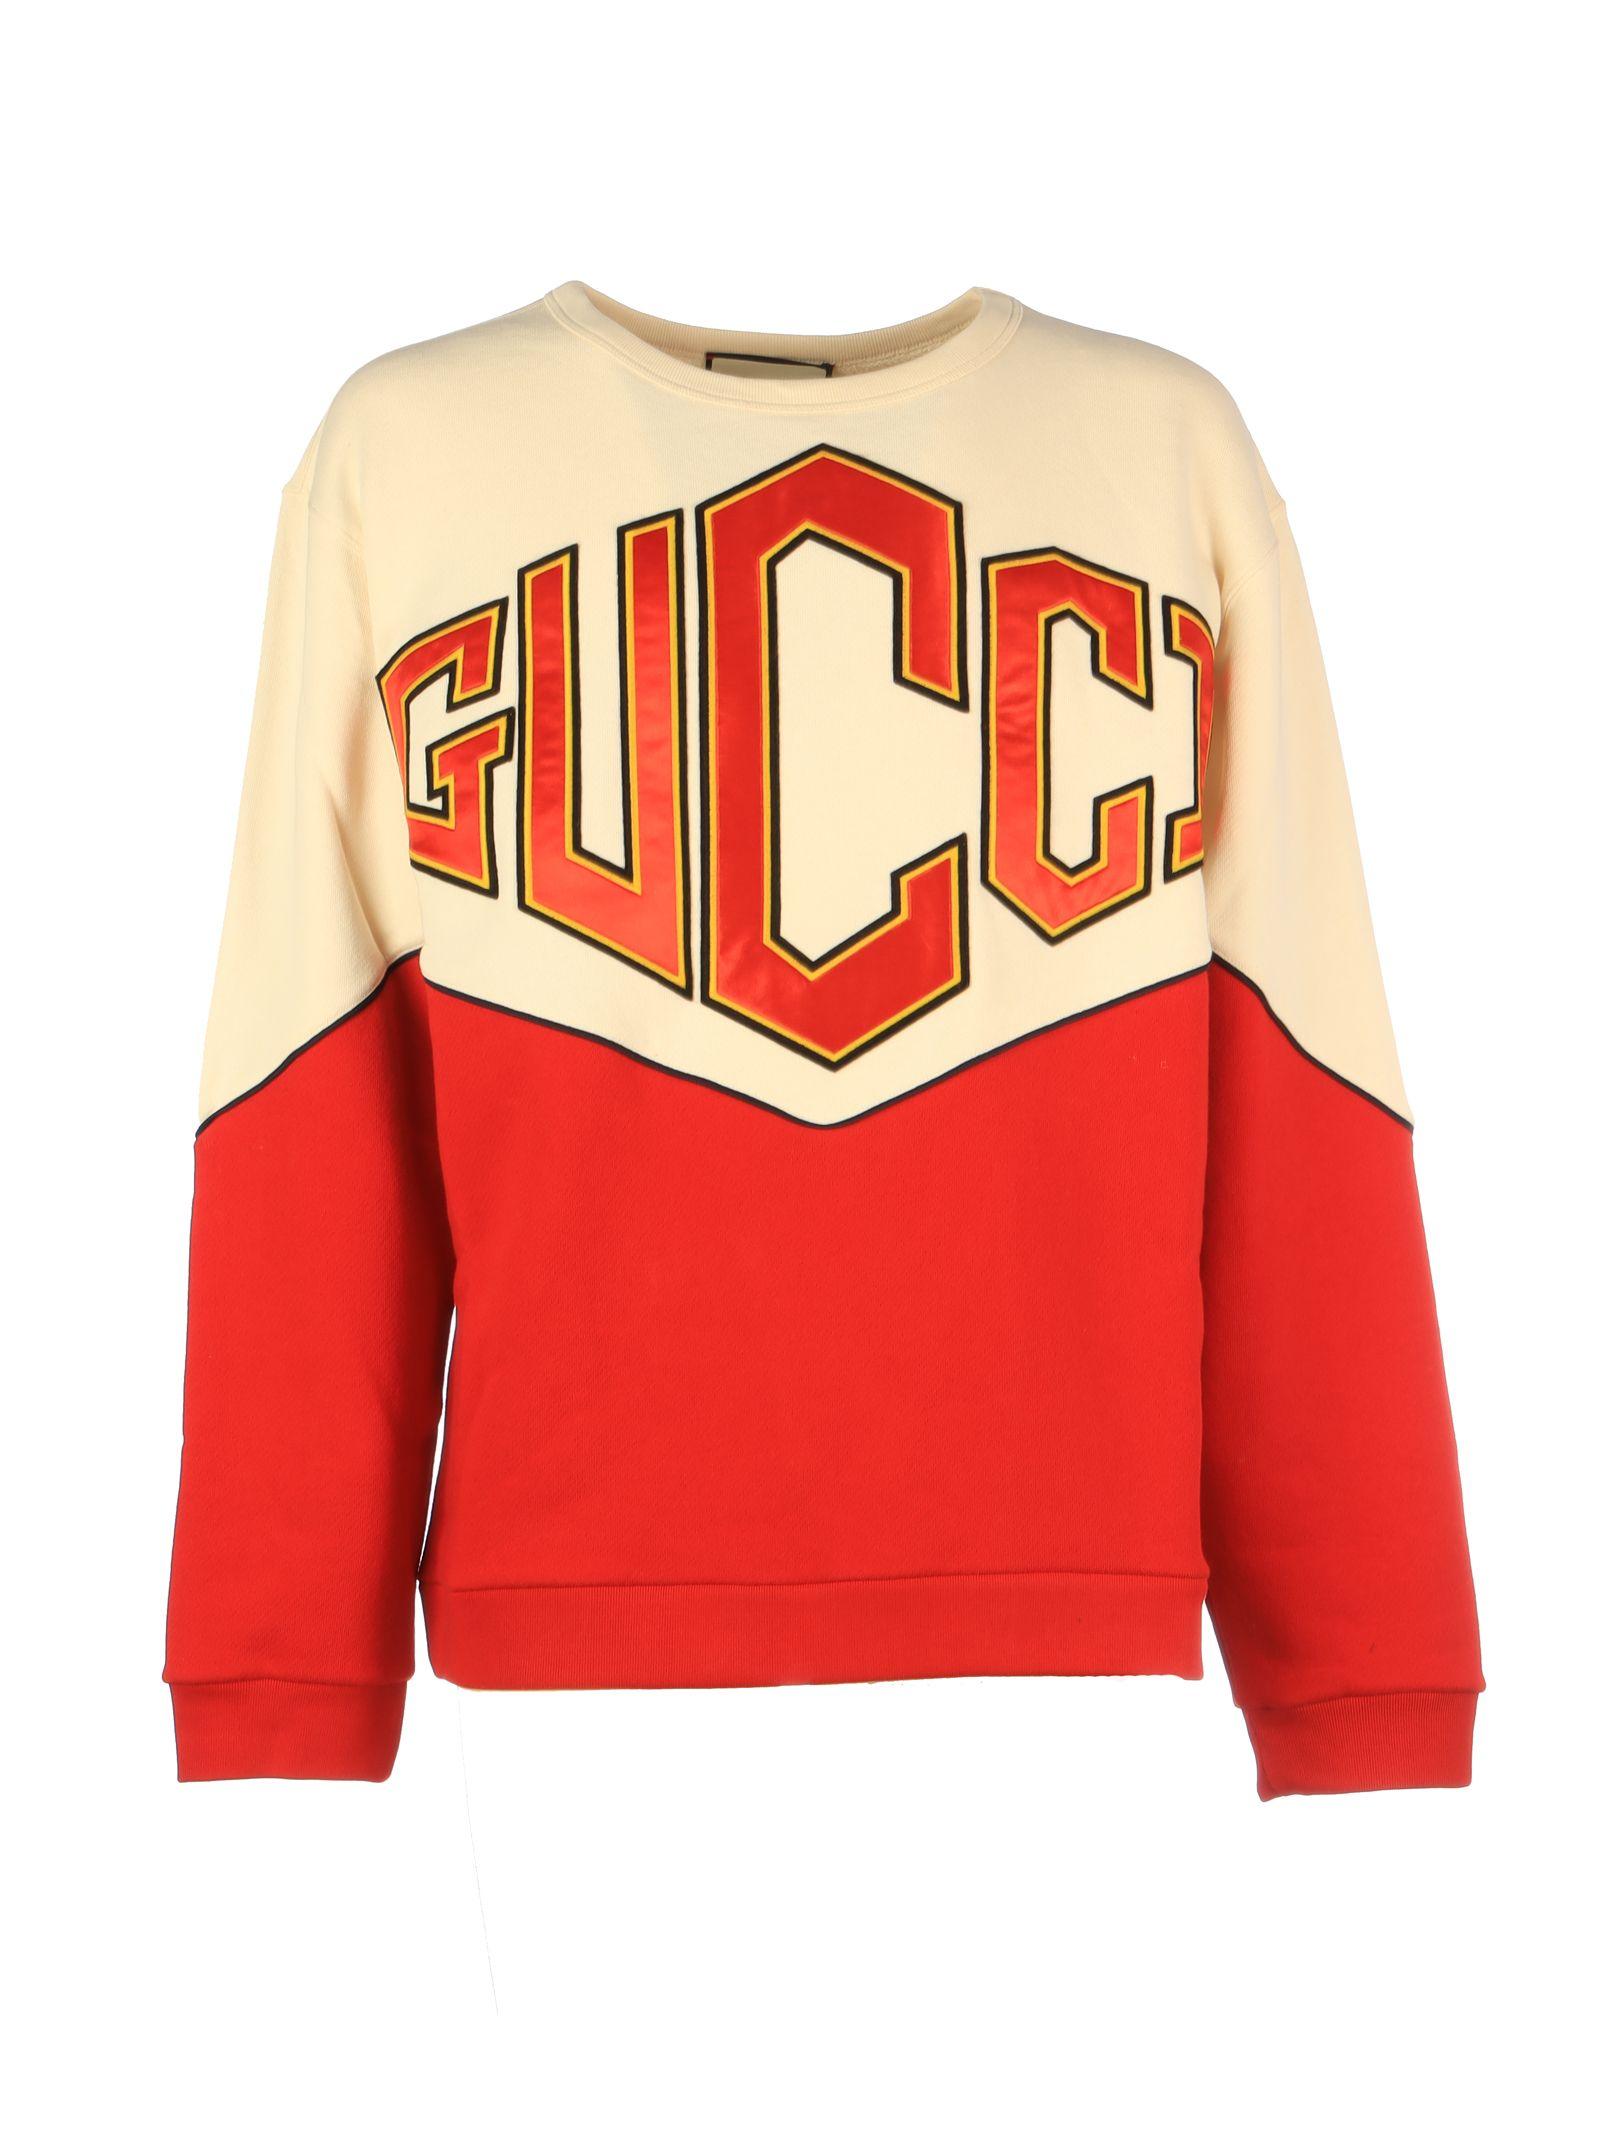  Gucci  Multicolor Cotton Sweatshirt  in Red  for Men Lyst